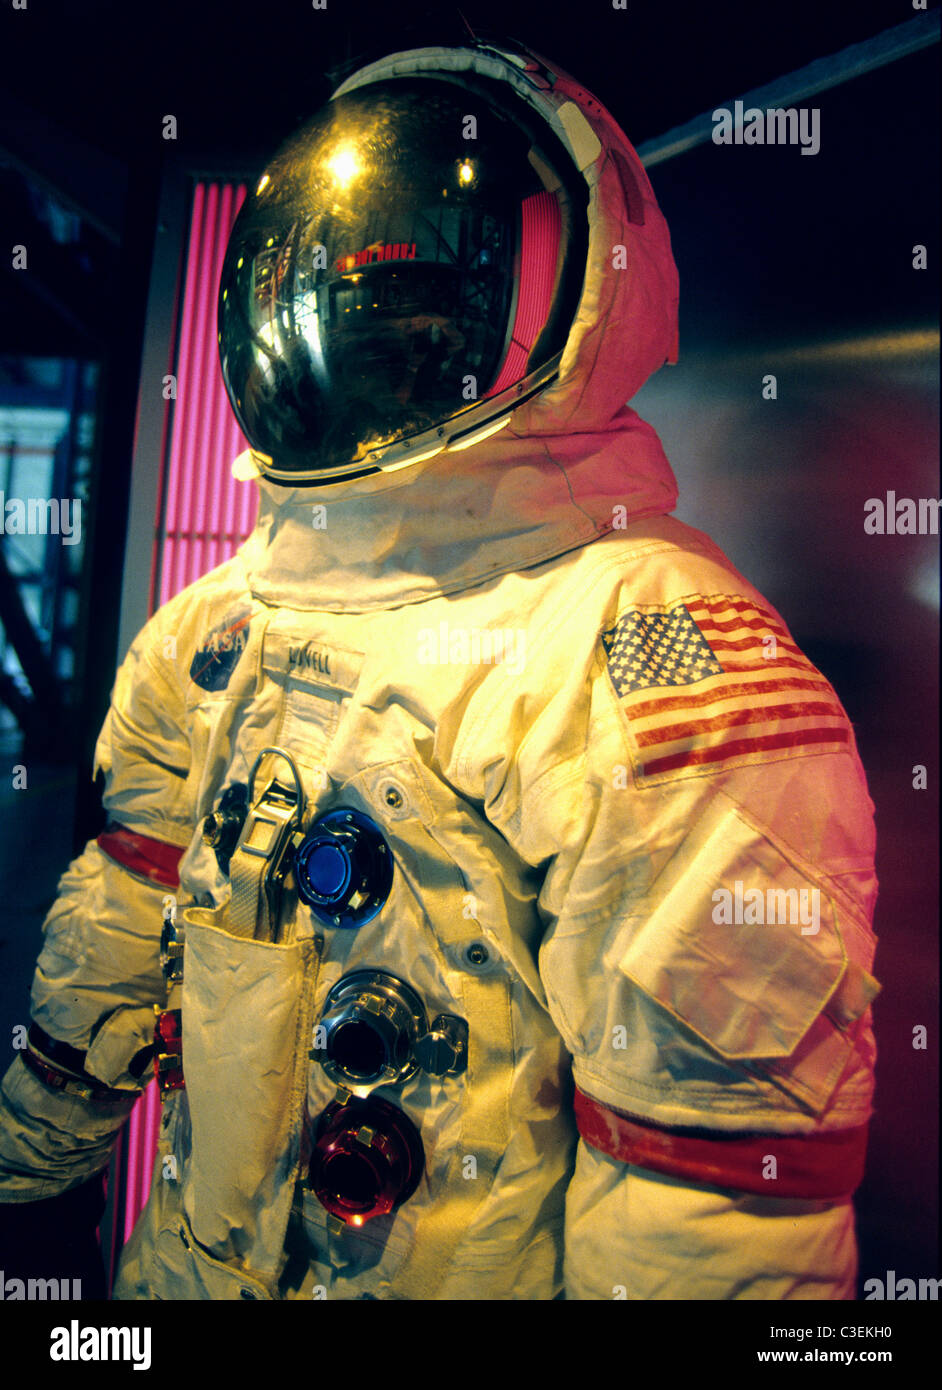 Astronaut suit worn by Jim Lovell at the Kennedy Space Center Centre at Cape Canaveral. Stock Photo